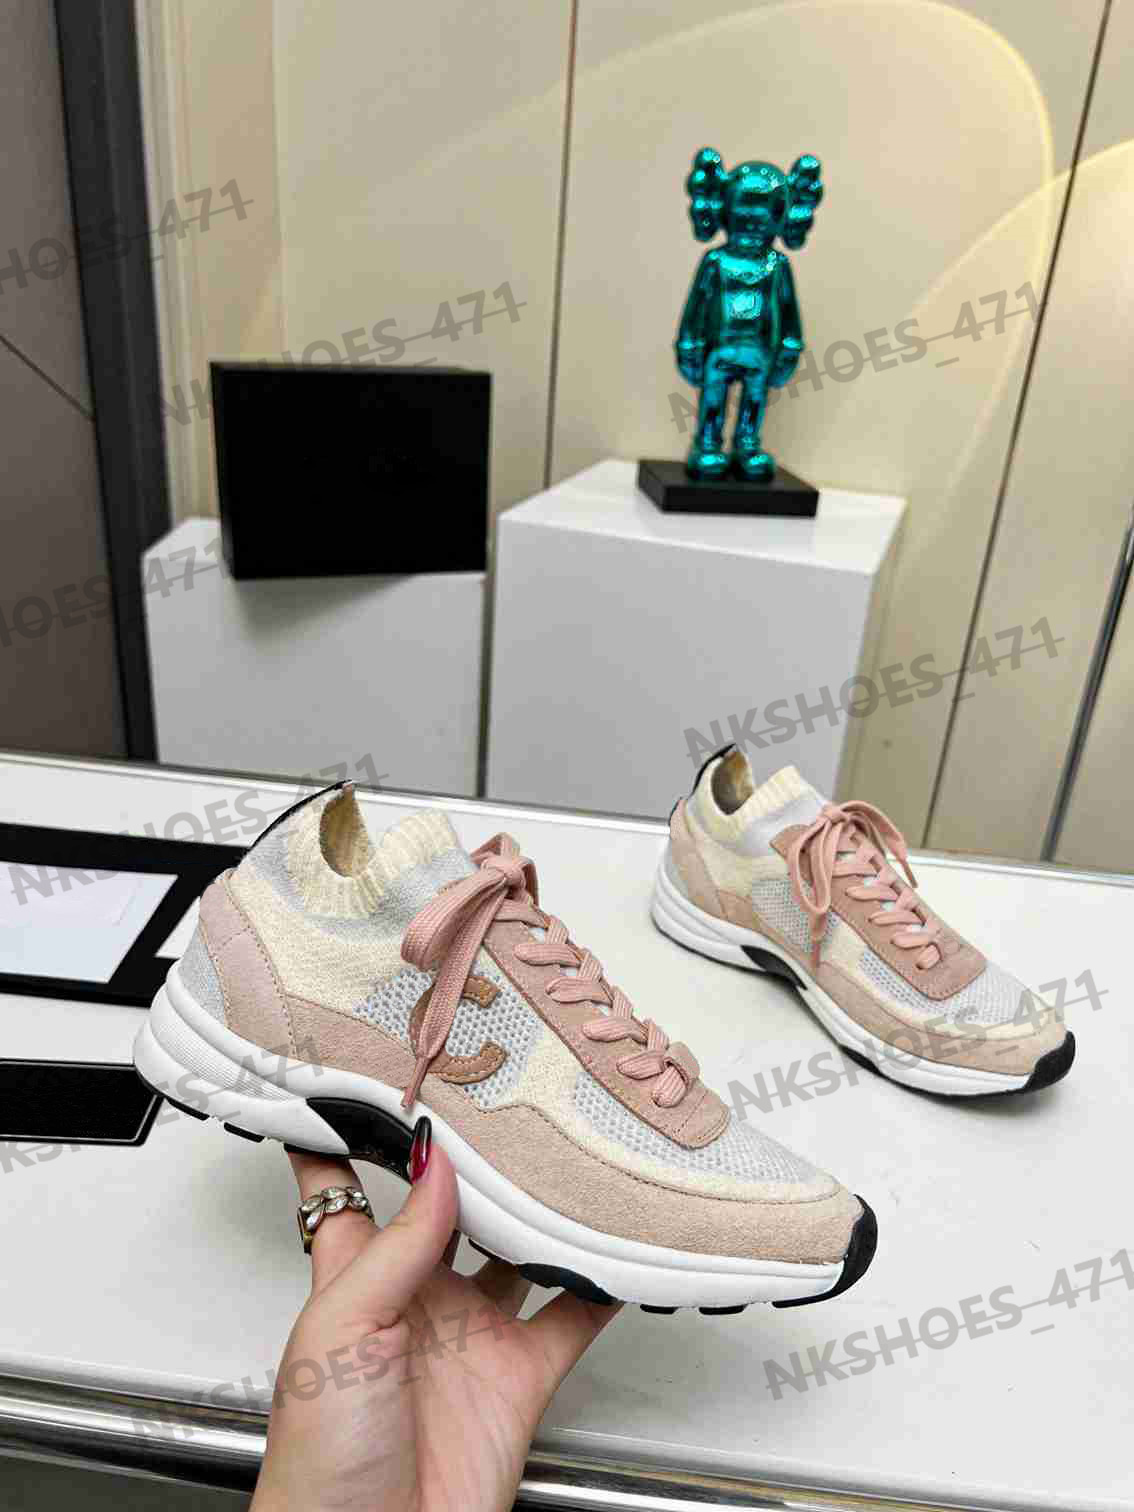 Designer Casual Shoes Classic Lace Up Outdoor Running Shoes Women Comfortable Versatile Triple White and Black Stitching Multi-Color Retro Print Outdoor Sneakers